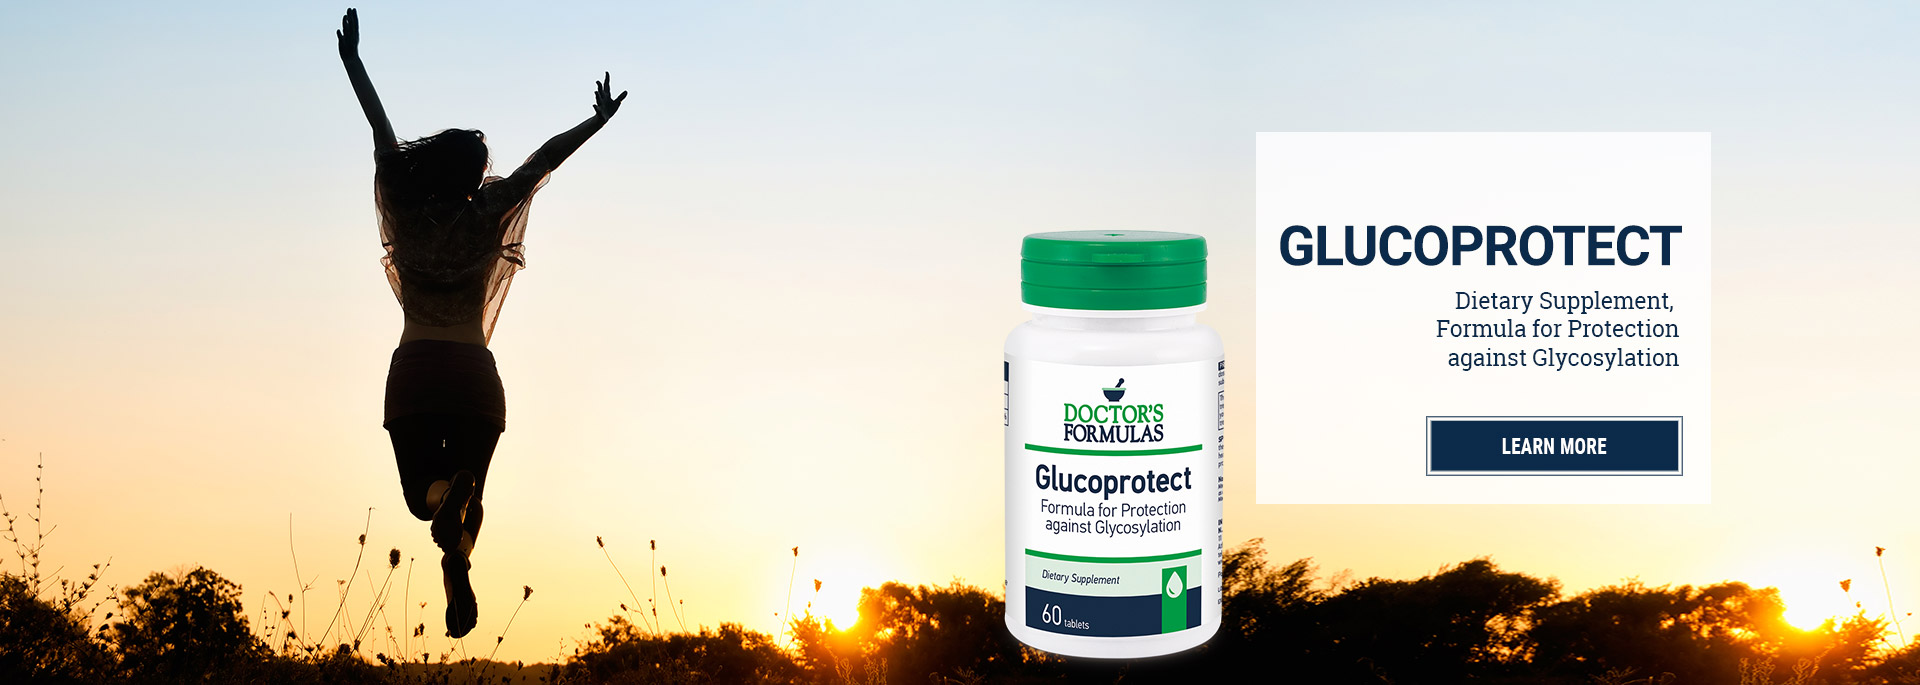 Glucoprotect Study